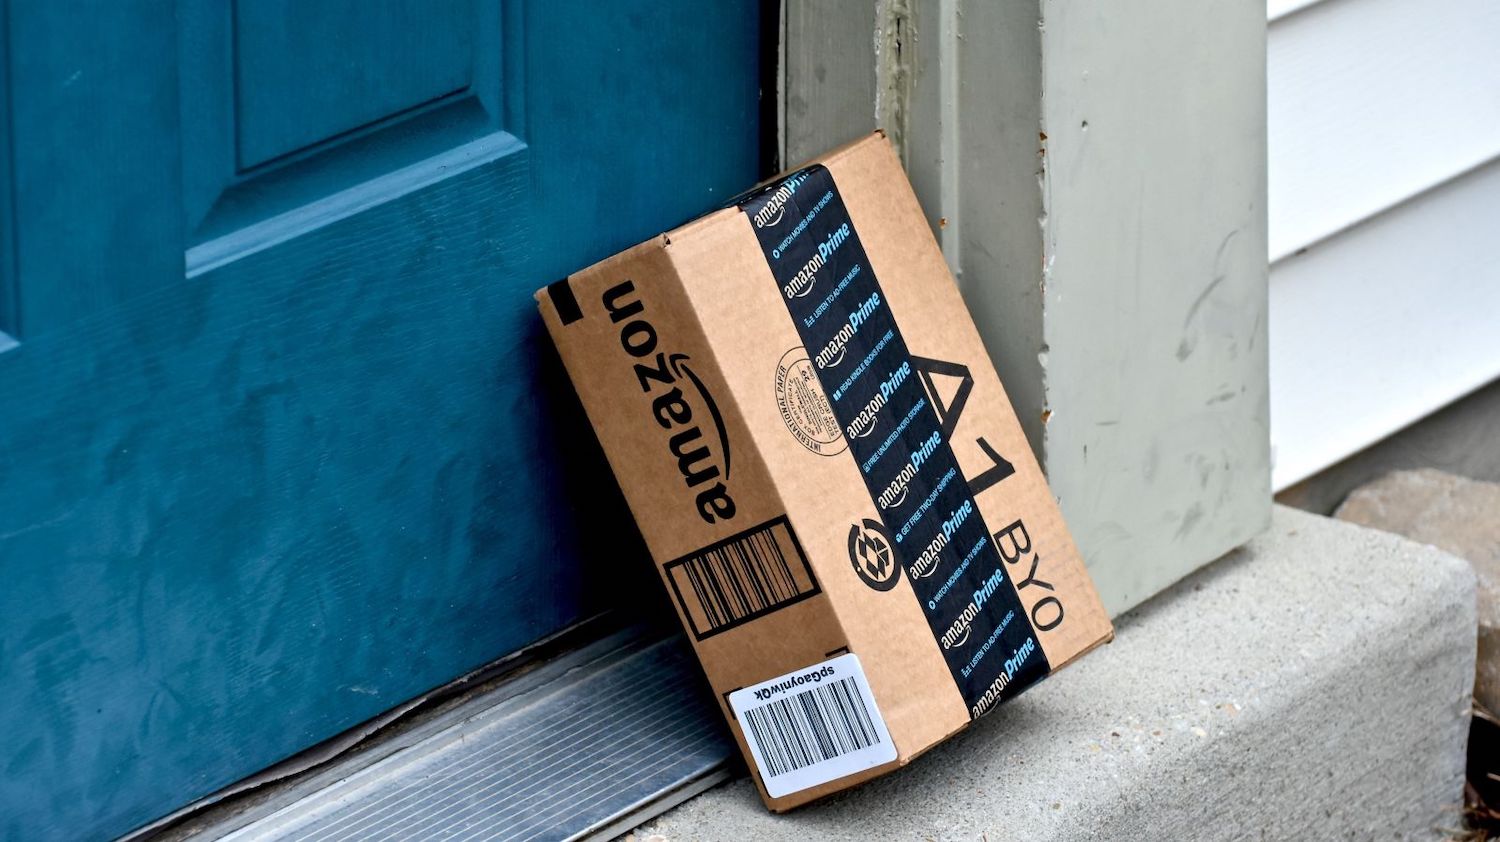 Lifehacker On Twitter Beware An Amazon Scam Where People Use Your Credit Card To Ship Items To Well You Here S How It Works Https T Co Bu9yfatcug Https T Co Uulo8mgu8t